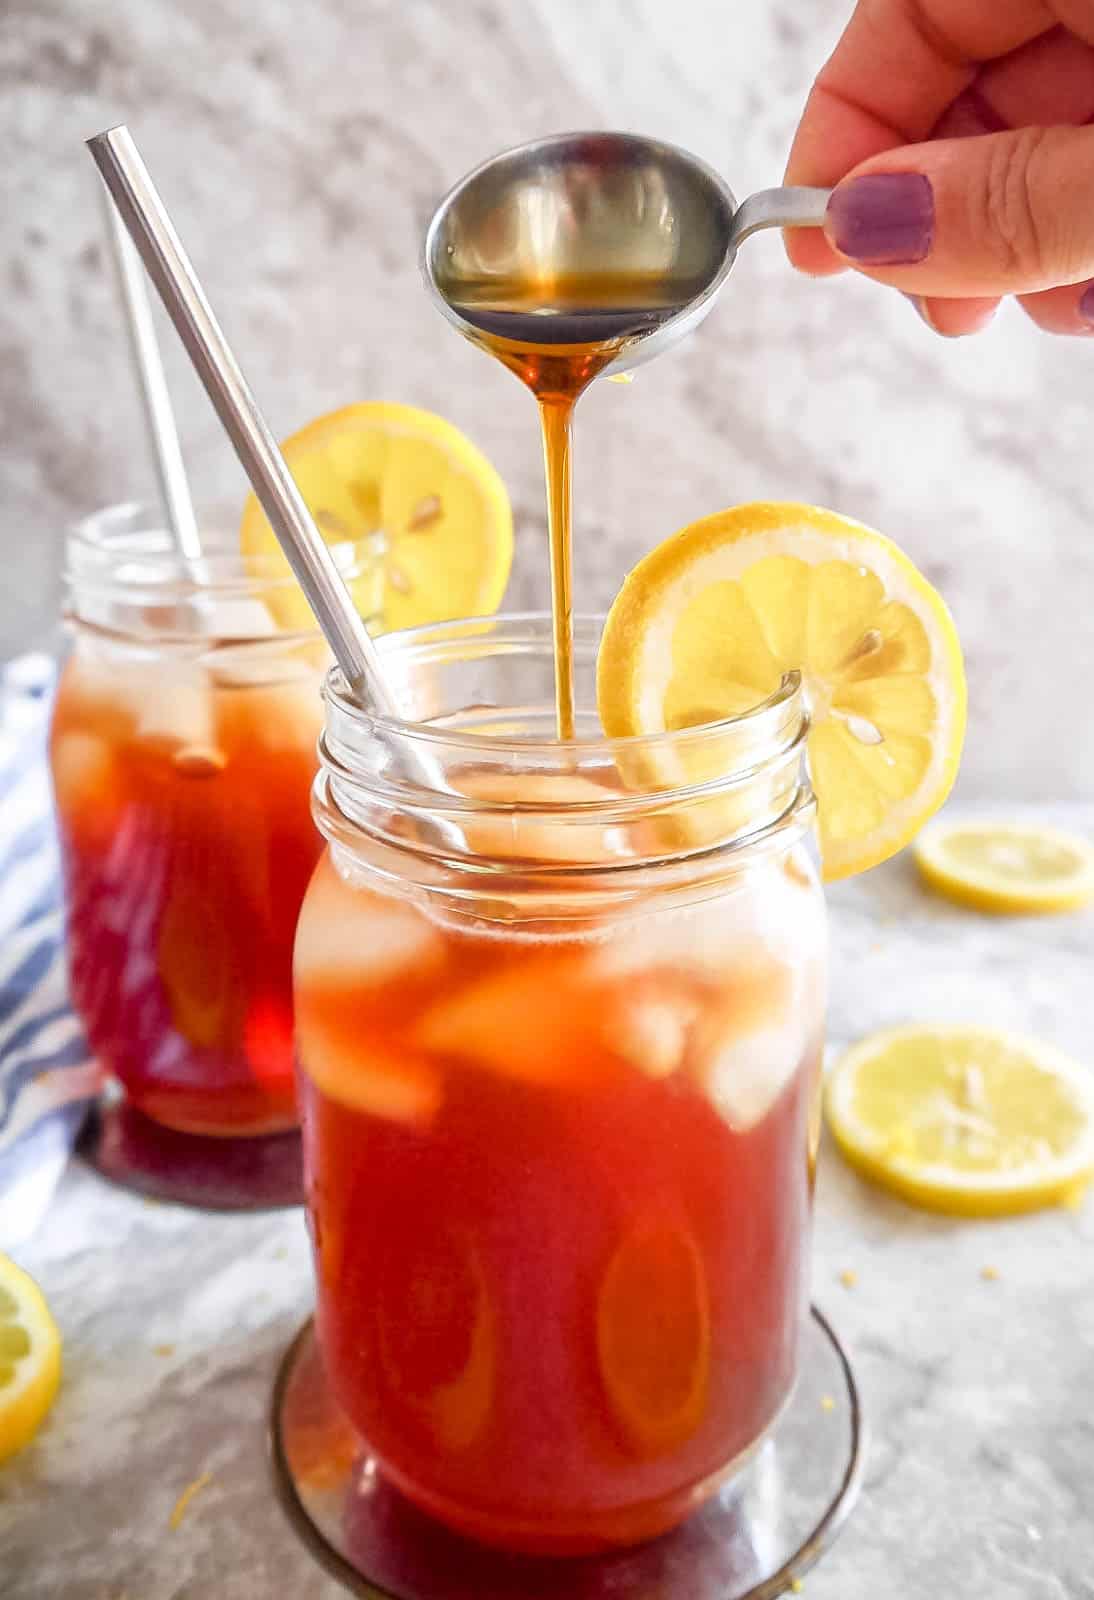 Maple syrup being poured into a glass of healthy sweet tea.